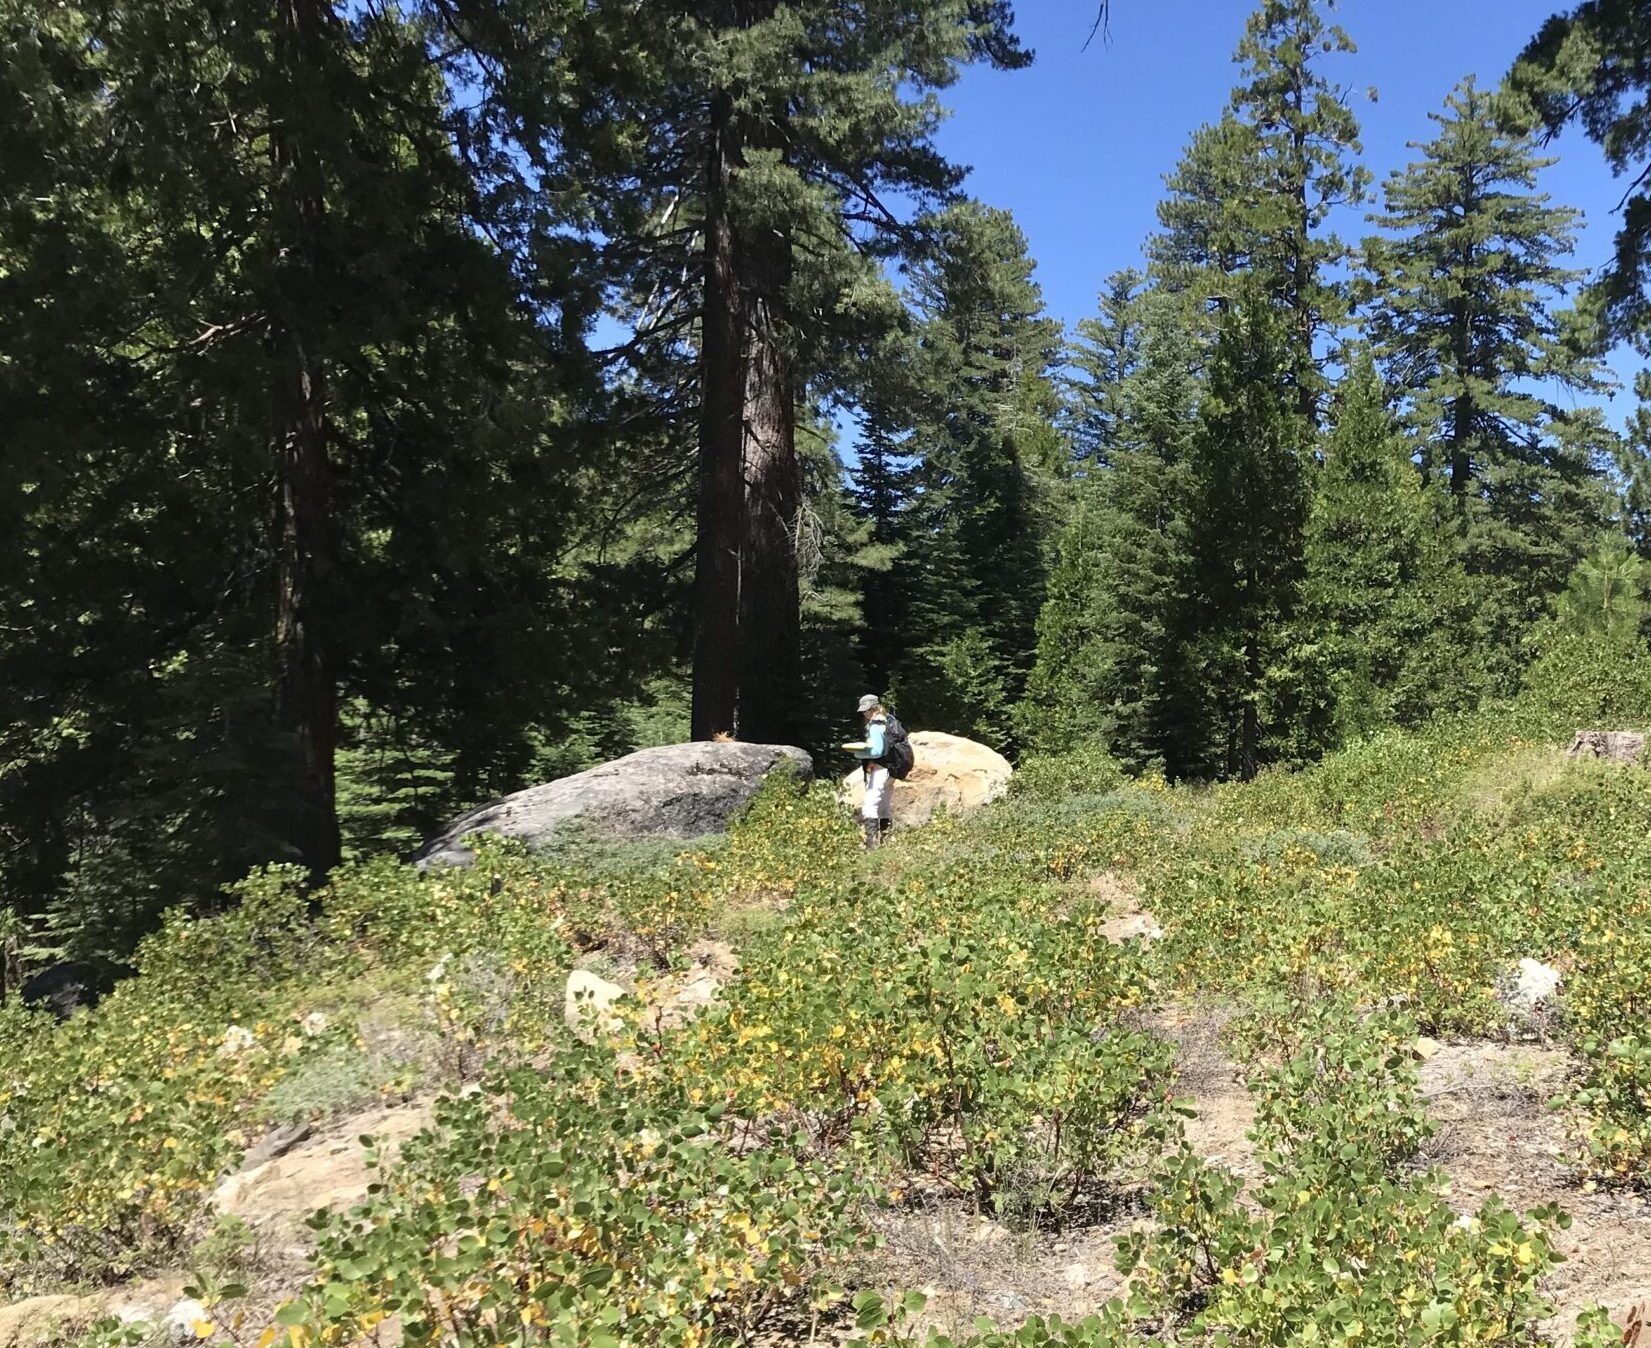 Tuolumne County On-Call Professional Archaeological Services for Forest Stewardship Program